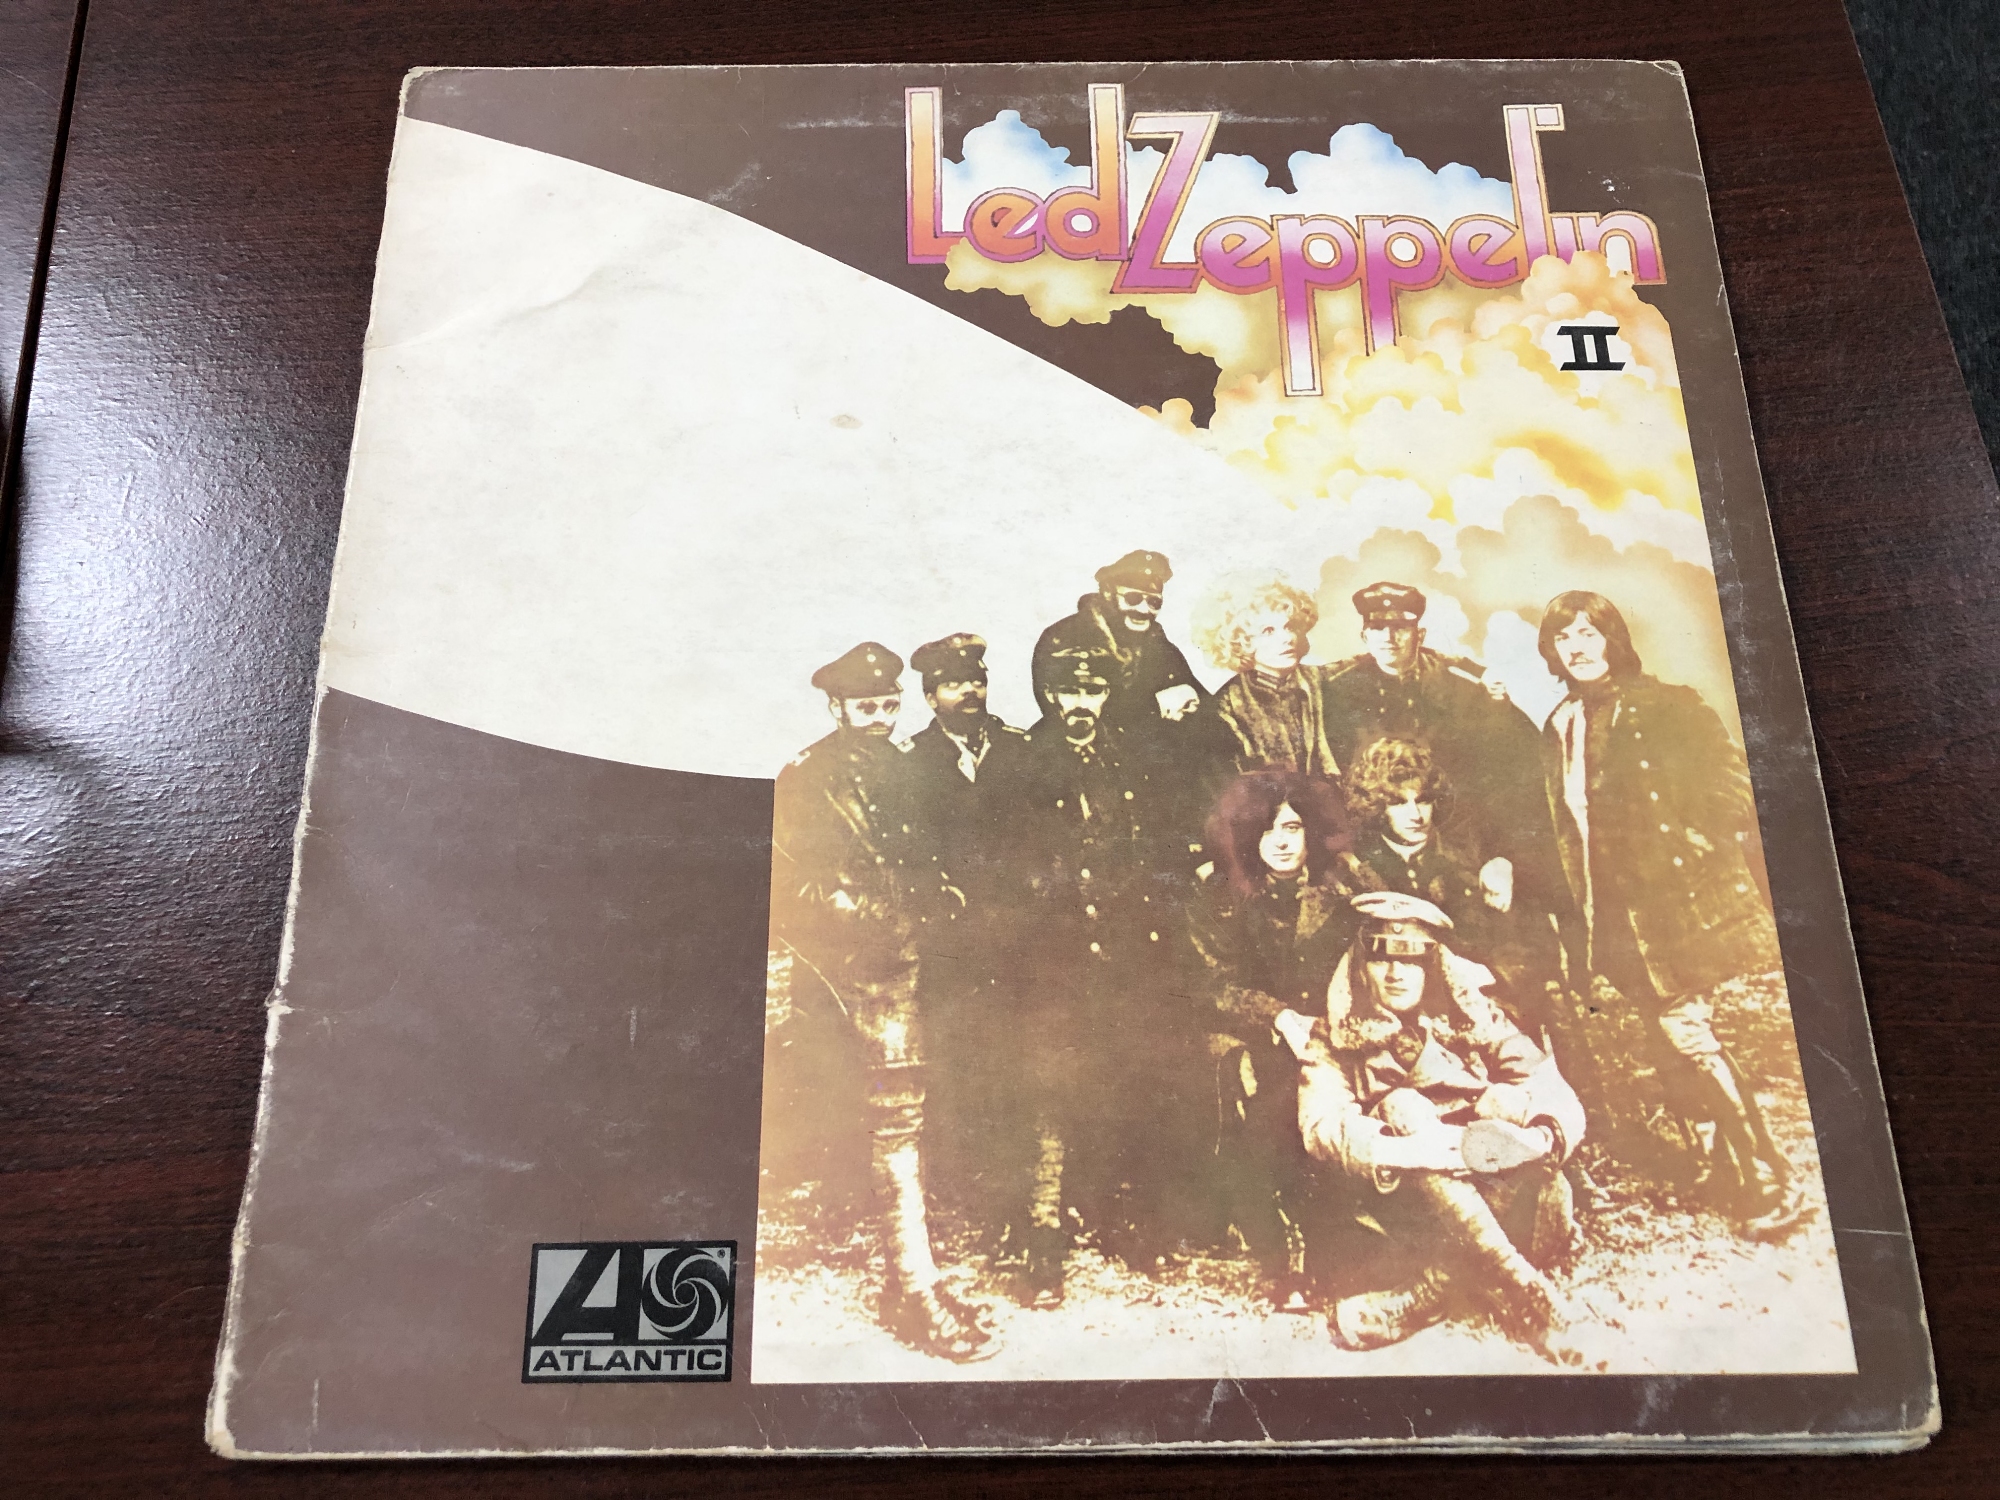 A box of CD's and vinyl LP's, The Beatles, Lindisfarne, Led Zeppelin, - Image 2 of 6